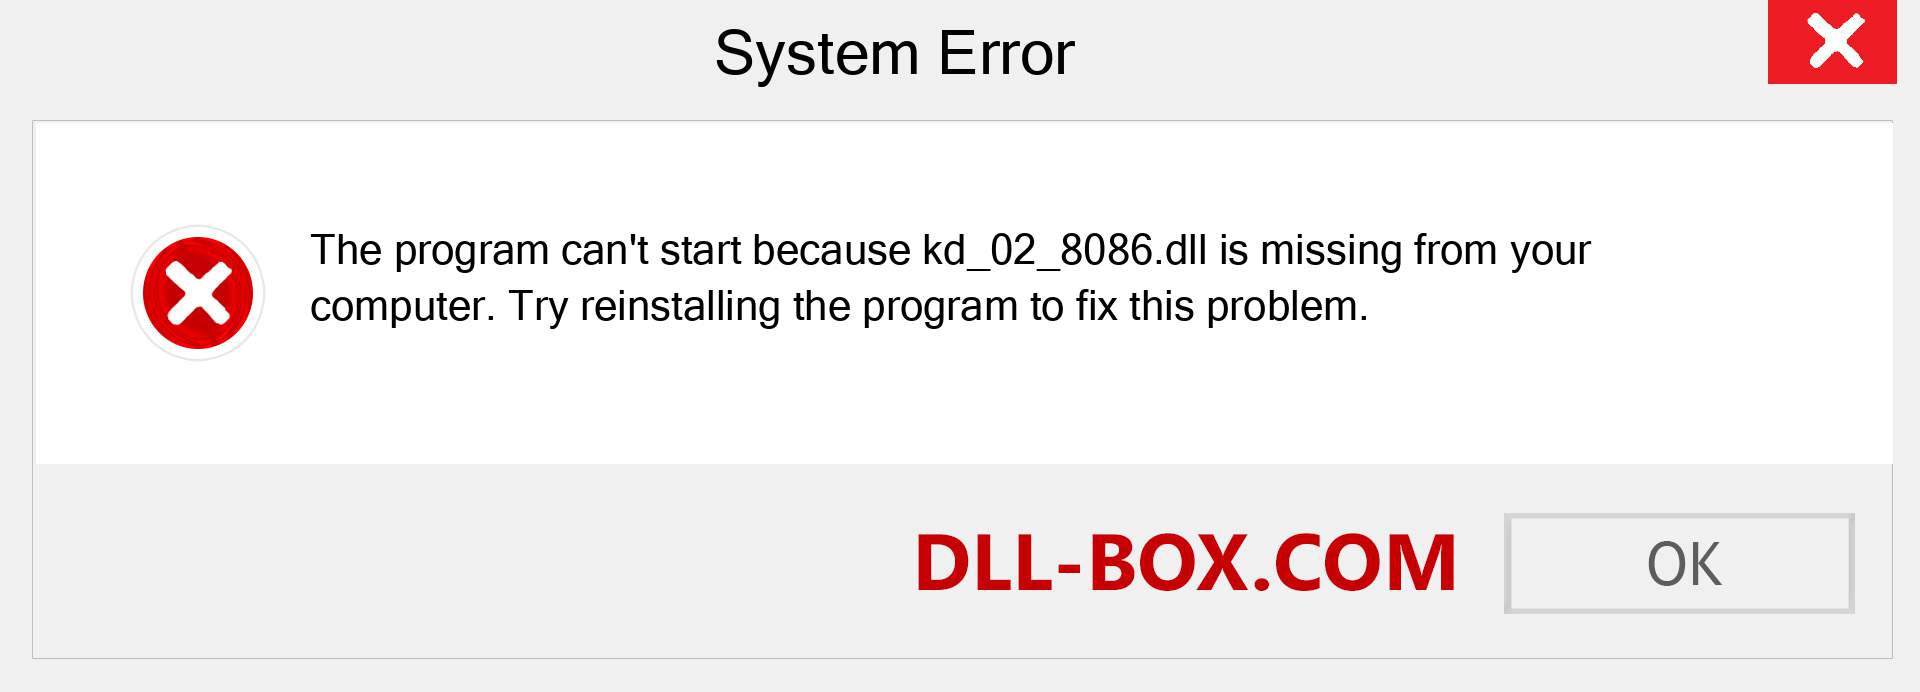  kd_02_8086.dll file is missing?. Download for Windows 7, 8, 10 - Fix  kd_02_8086 dll Missing Error on Windows, photos, images